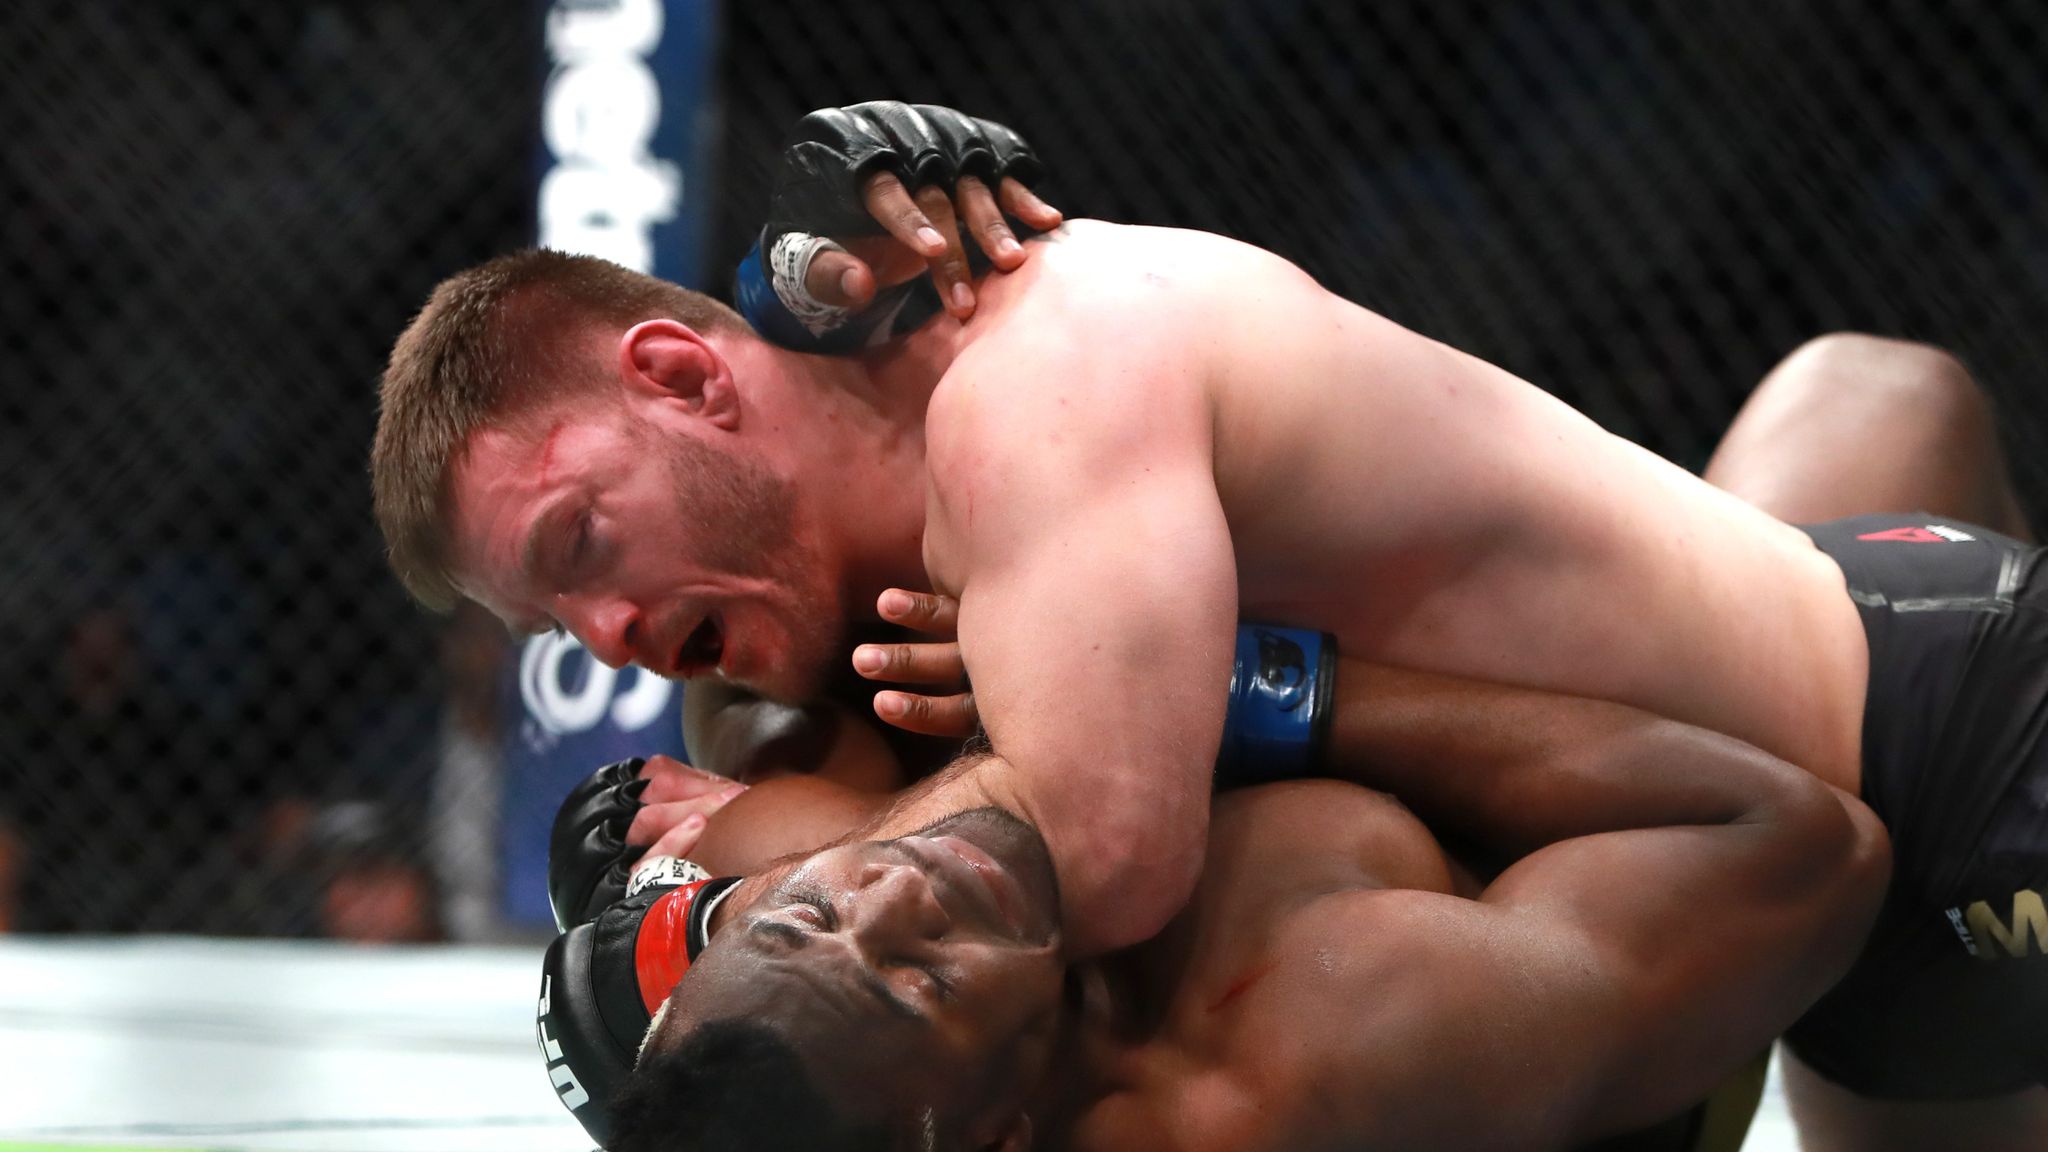 Stipe Miocic defeats Francis Ngannou to defend heavyweight title at UFC 220  | MMA News | Sky Sports